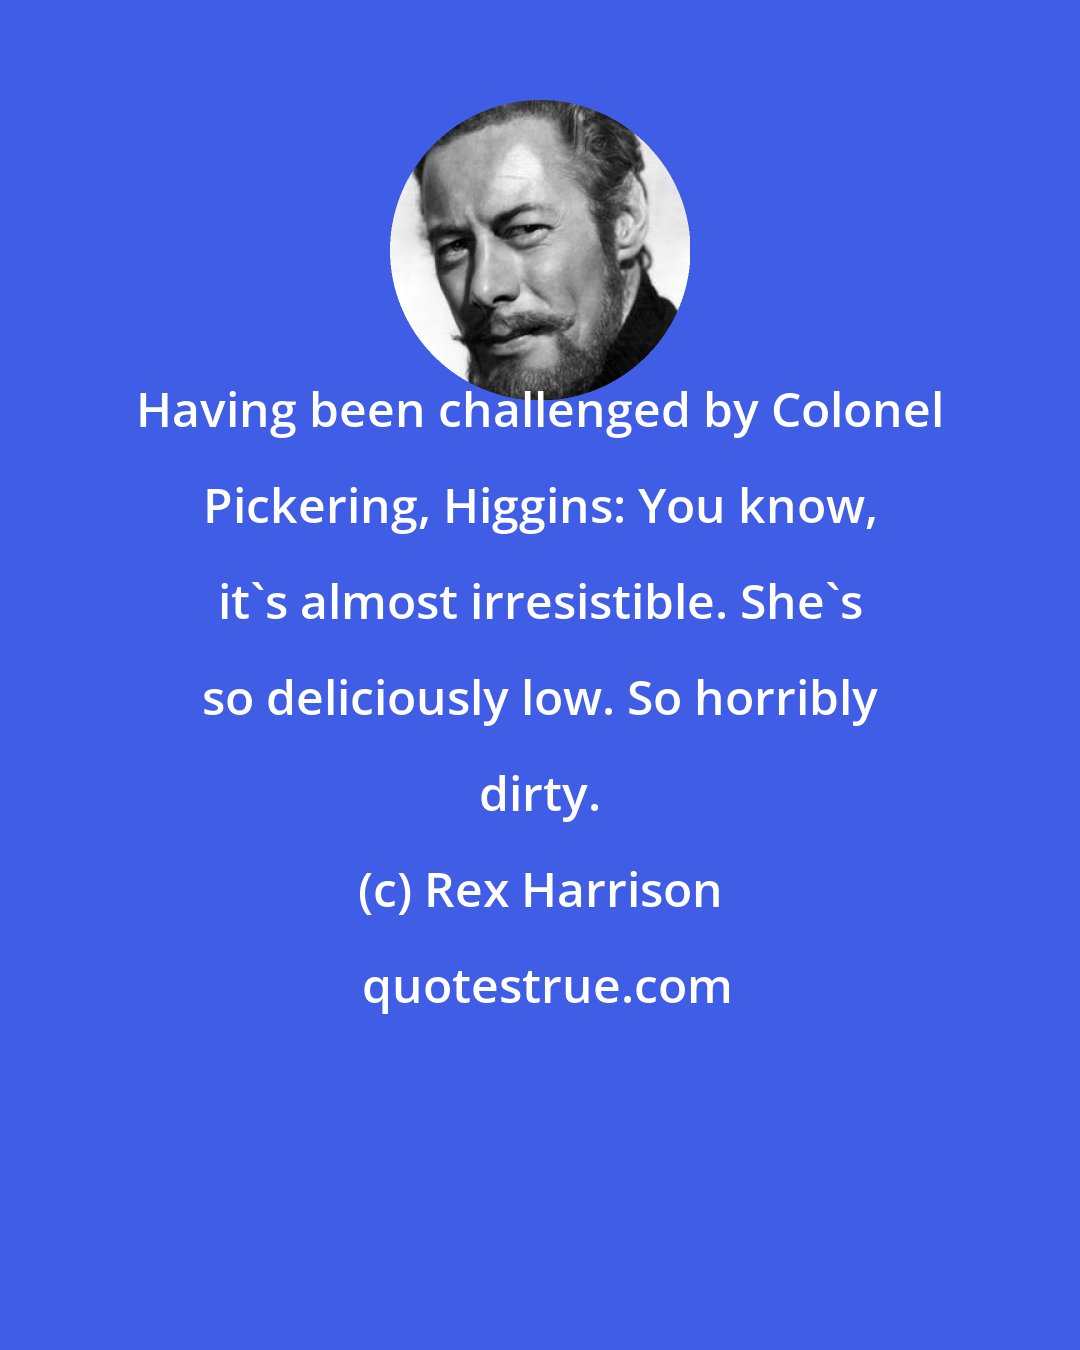 Rex Harrison: Having been challenged by Colonel Pickering, Higgins: You know, it's almost irresistible. She's so deliciously low. So horribly dirty.